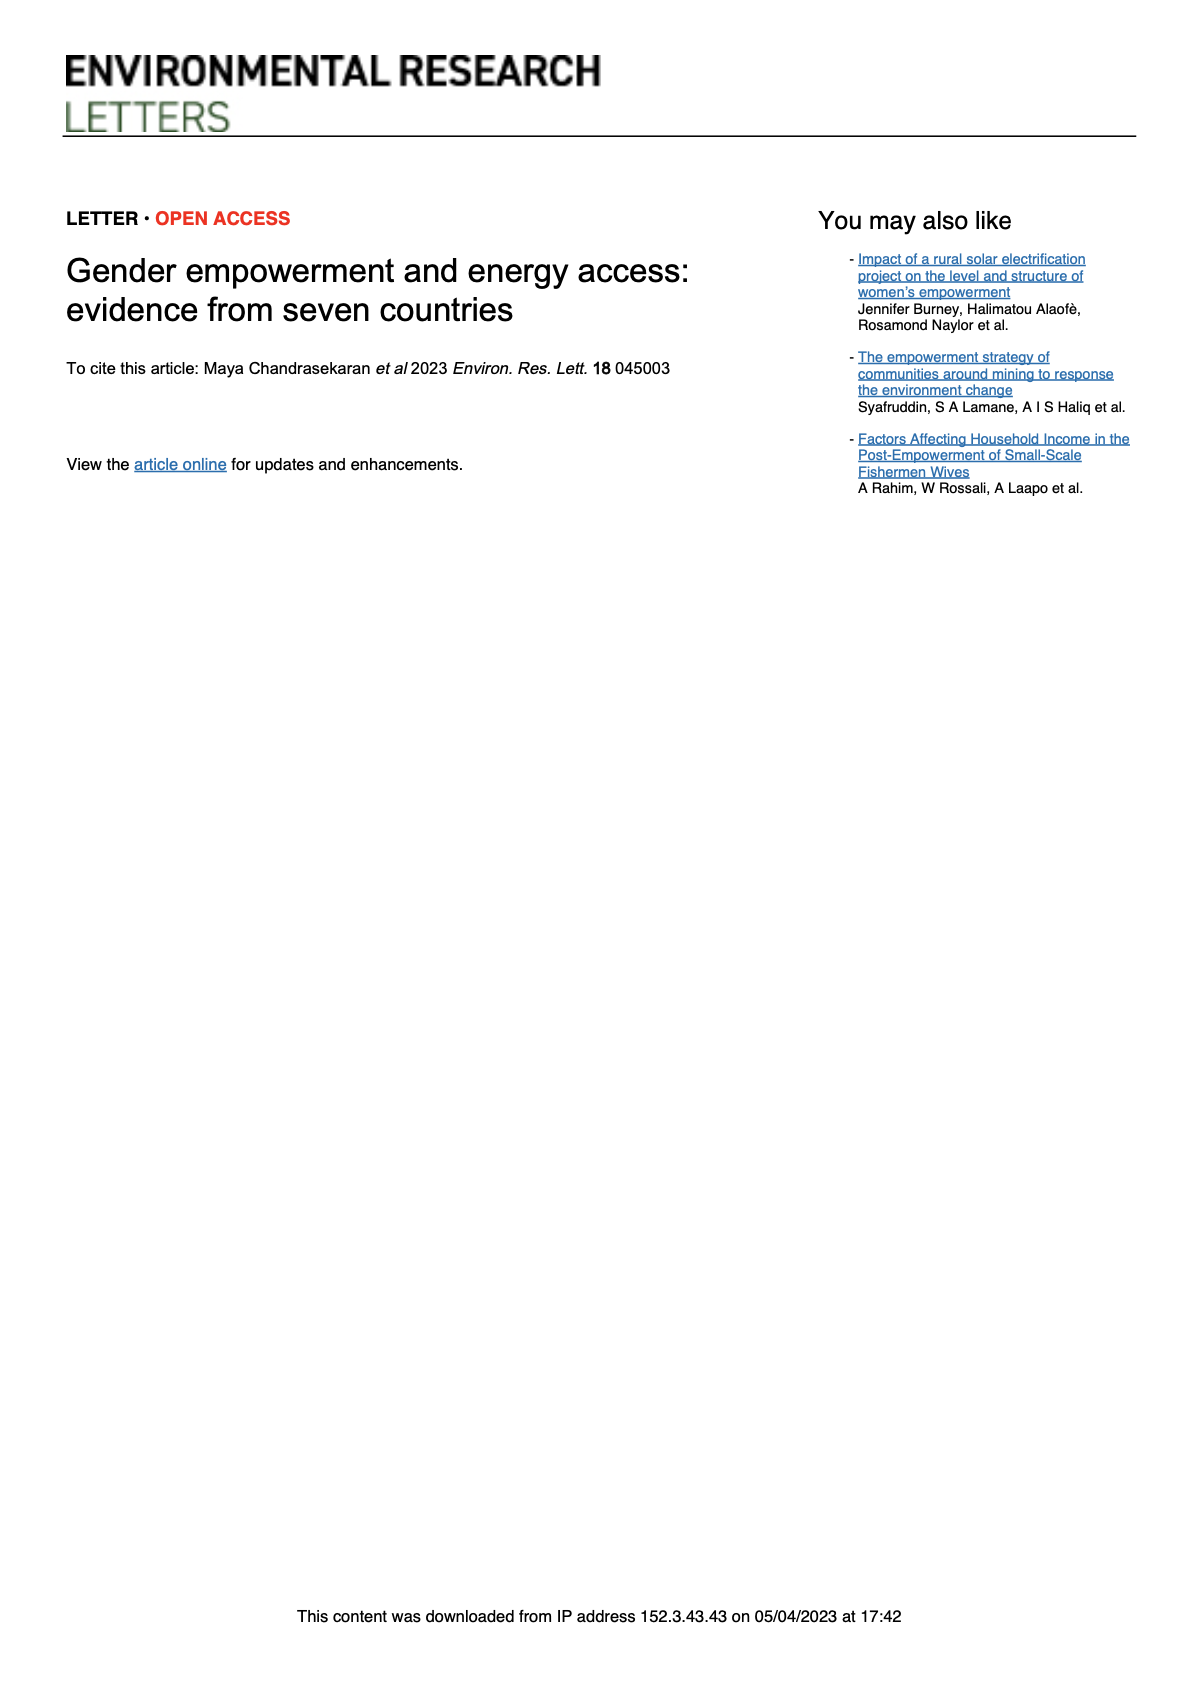 Gender empowerment and energy access: evidence from seven countries